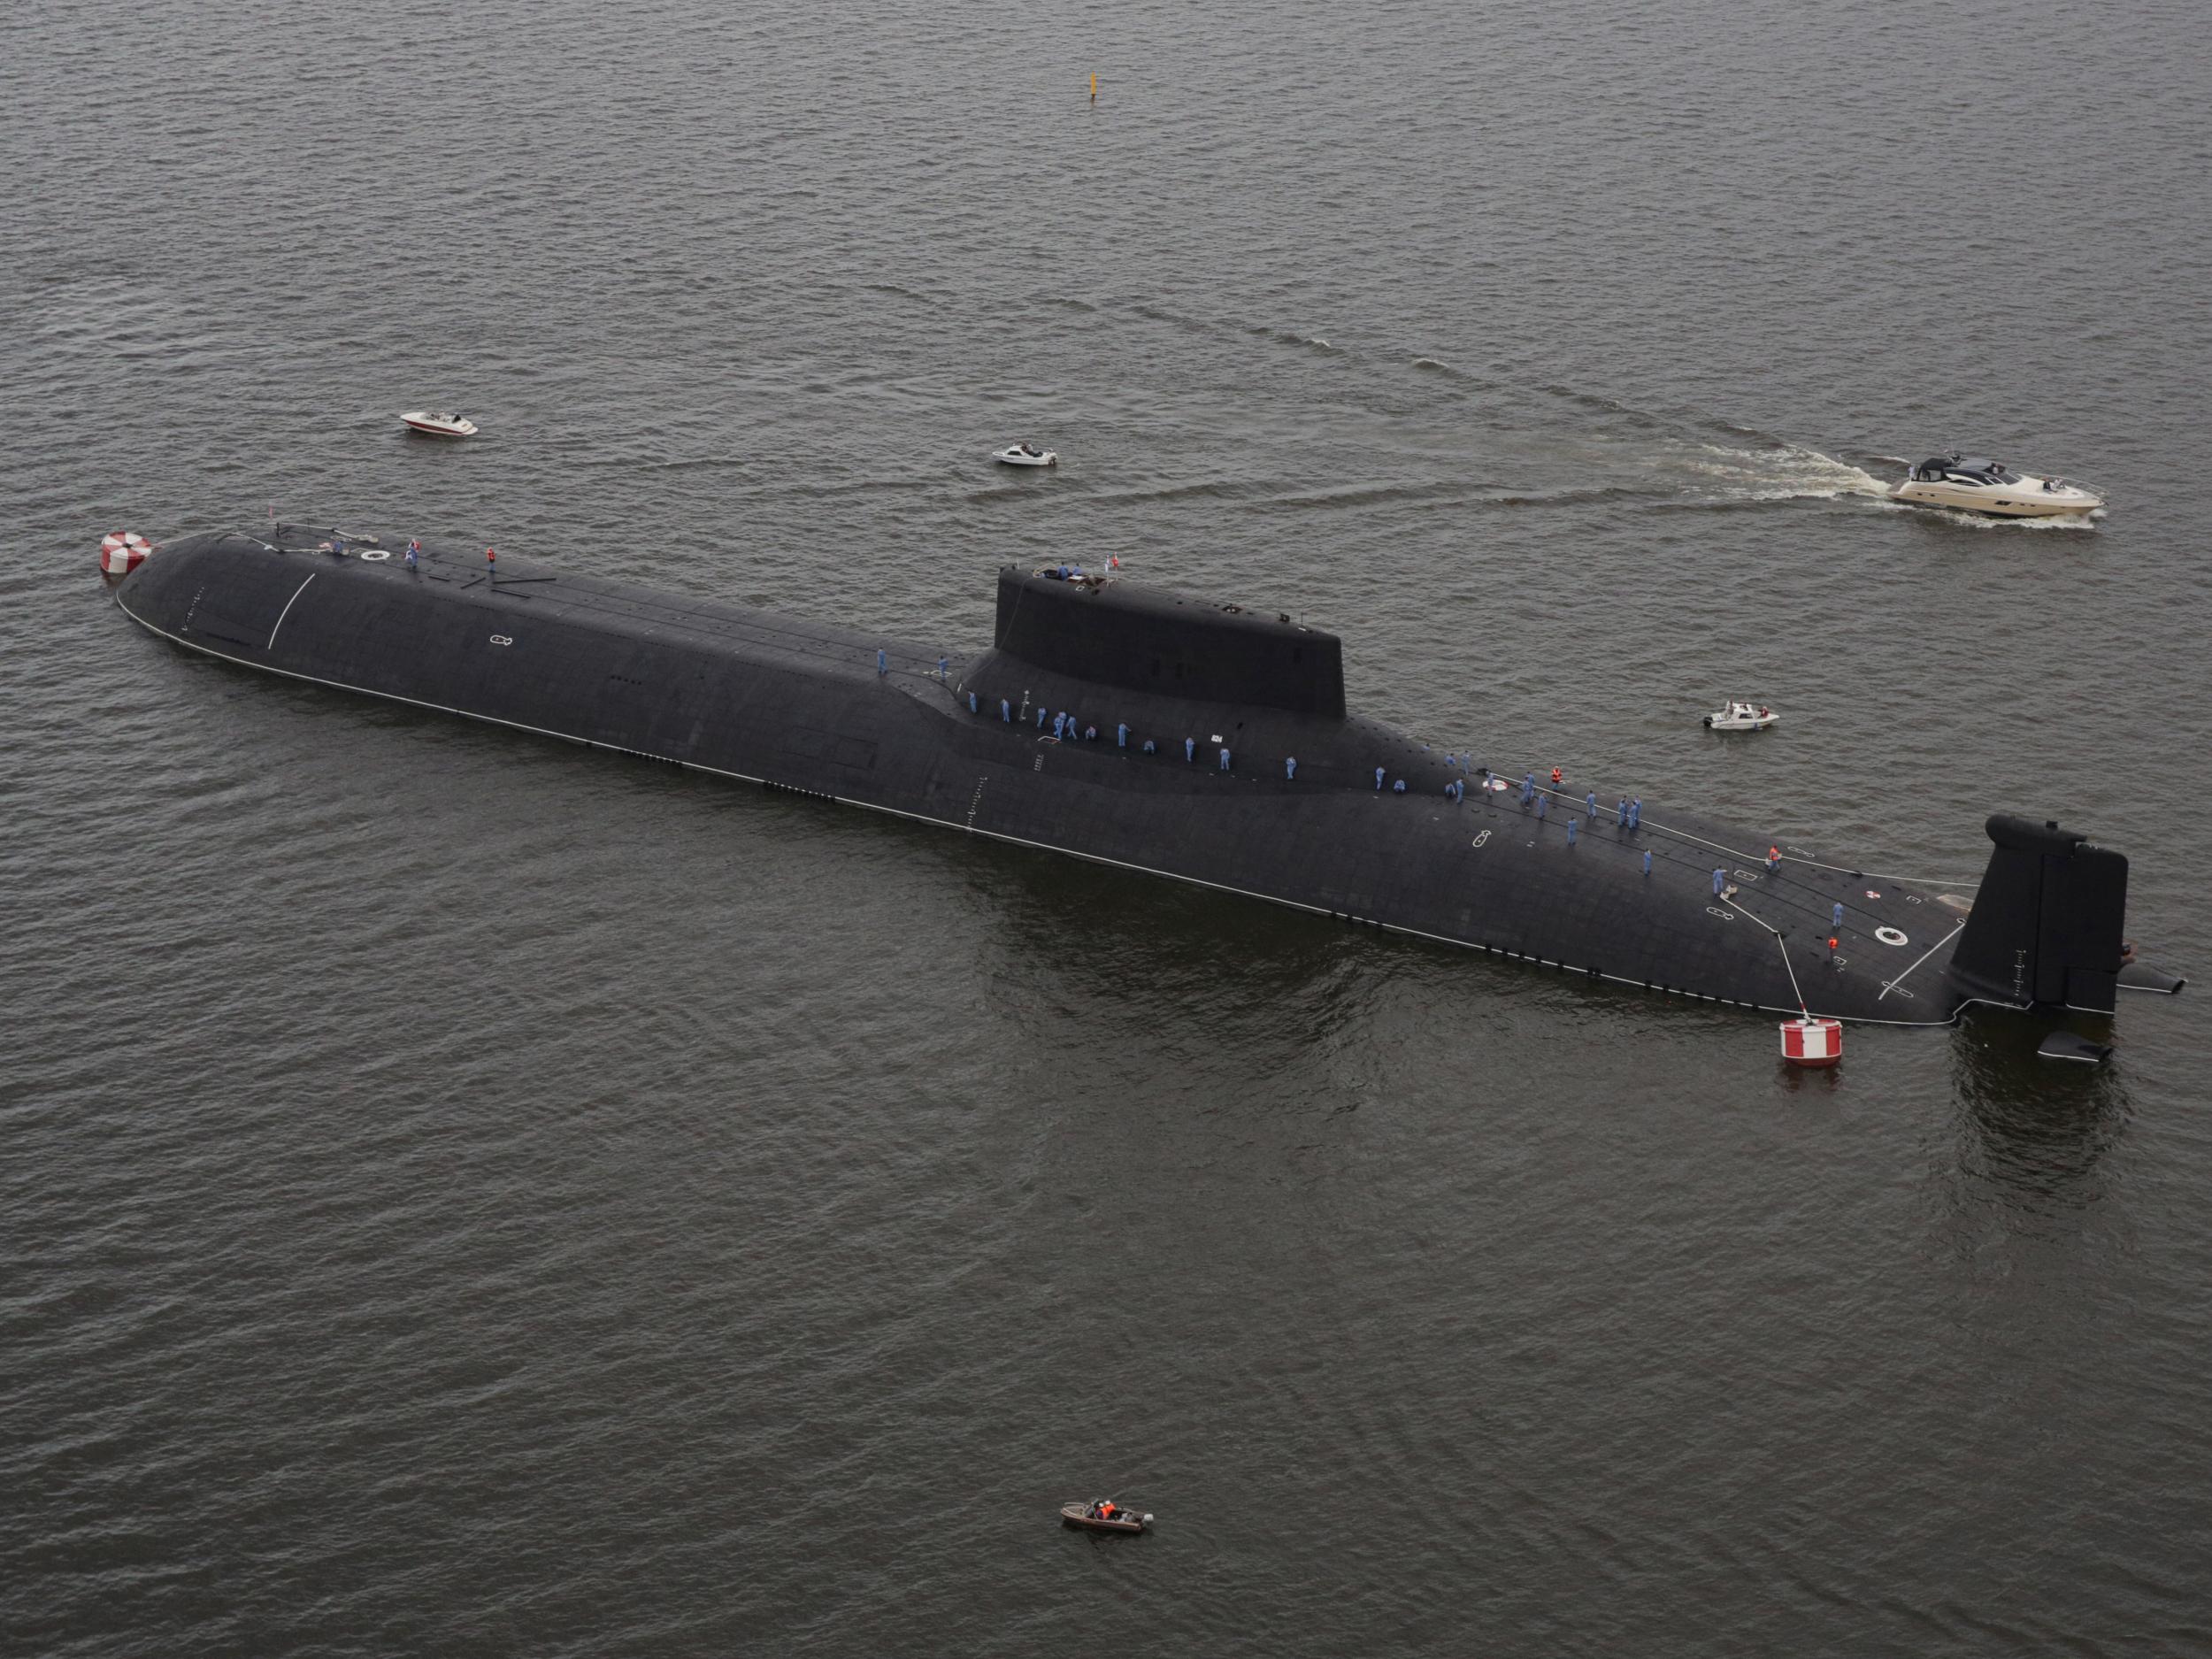 An aerial view shows the Russian nuclear submarine Dmitry Donskoy moored on the eve of the the Navy Day parade in Kronshtadt, a seaport town in the suburb of St. Petersburg, Russia